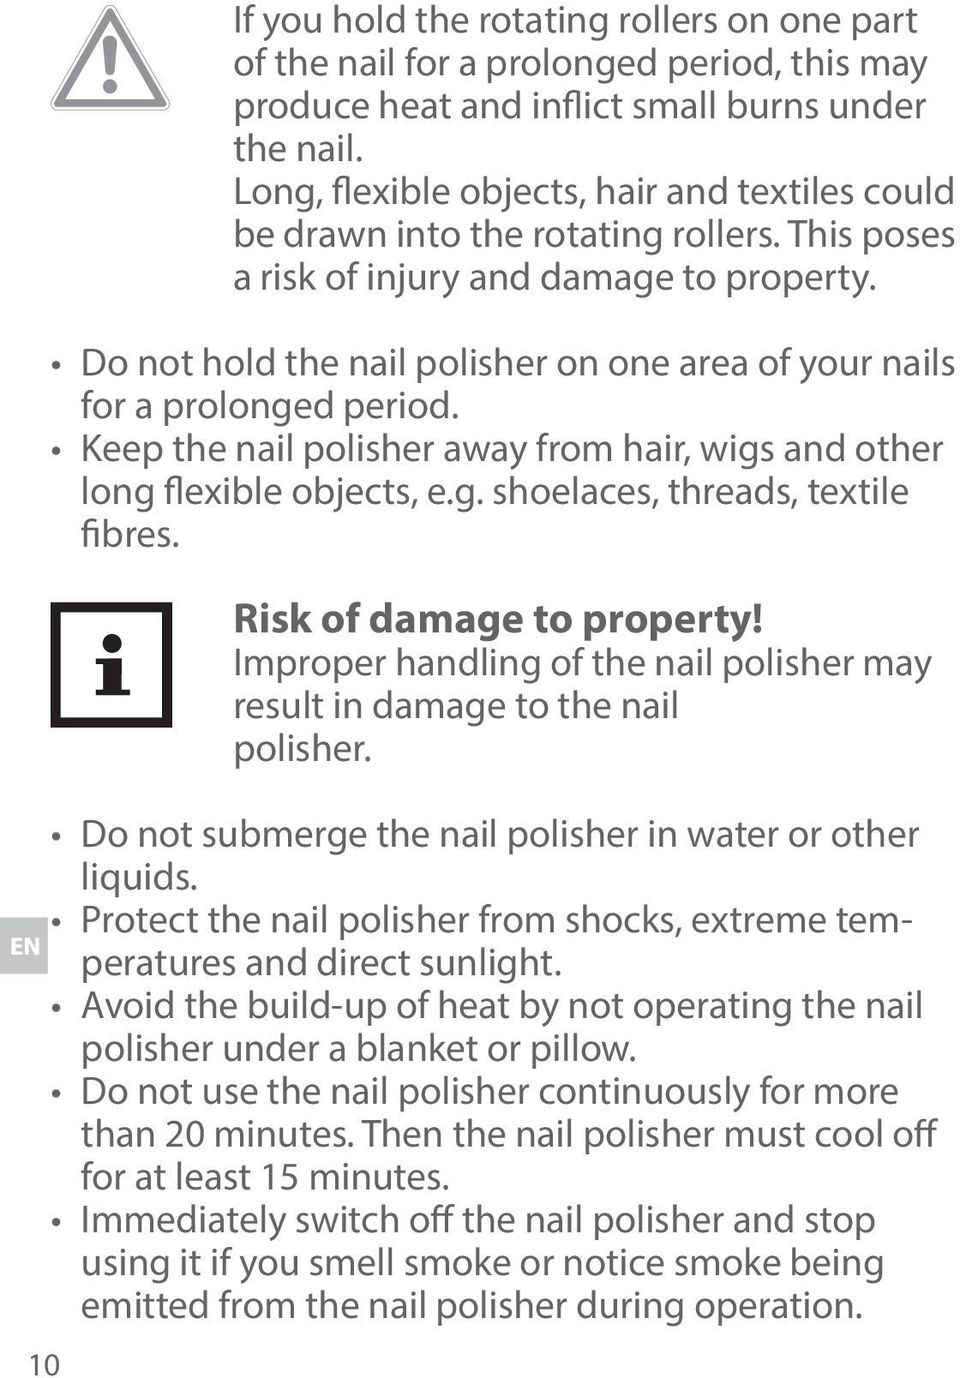 Do not hold the nail polisher on one area of your nails for a prolonged period. Keep the nail polisher away from hair, wigs and other long flexible objects, e.g. shoelaces, threads, textile fibres.